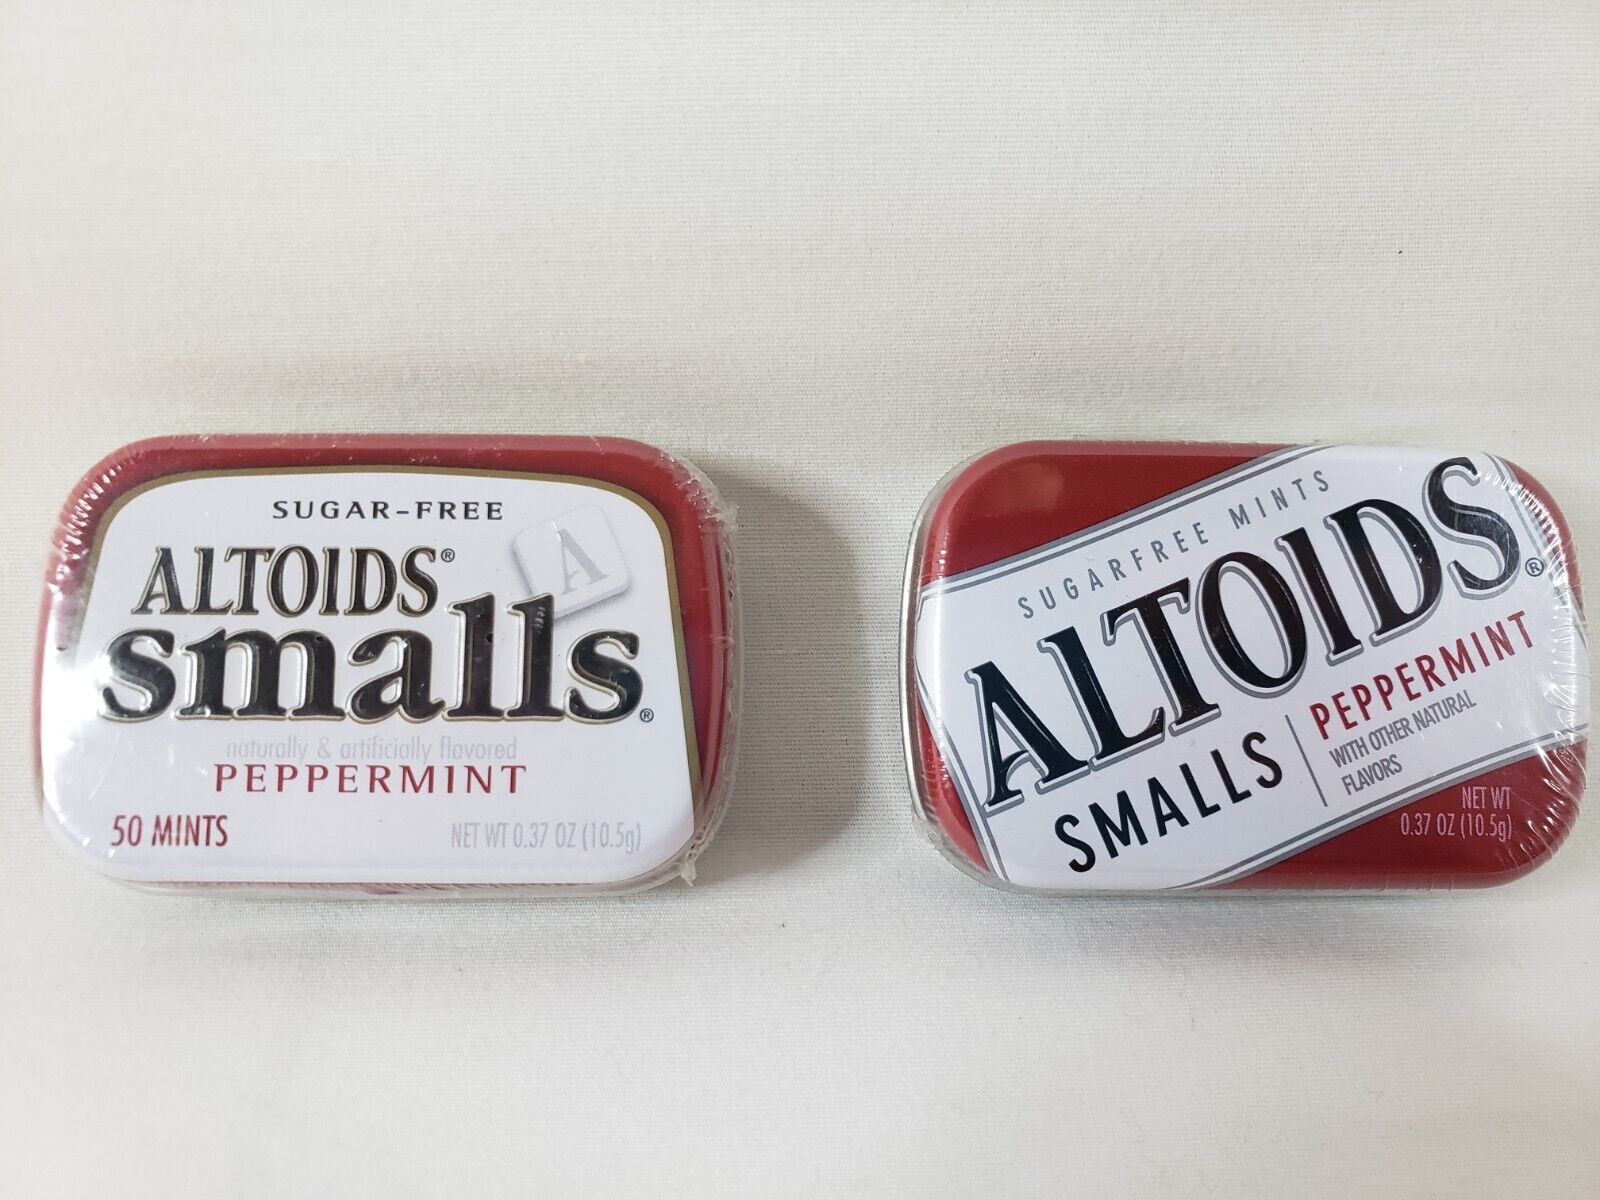 Altoids Smalls Peppermint, New old Stock, Flavor Mints EXP. 12 & 16, Collector